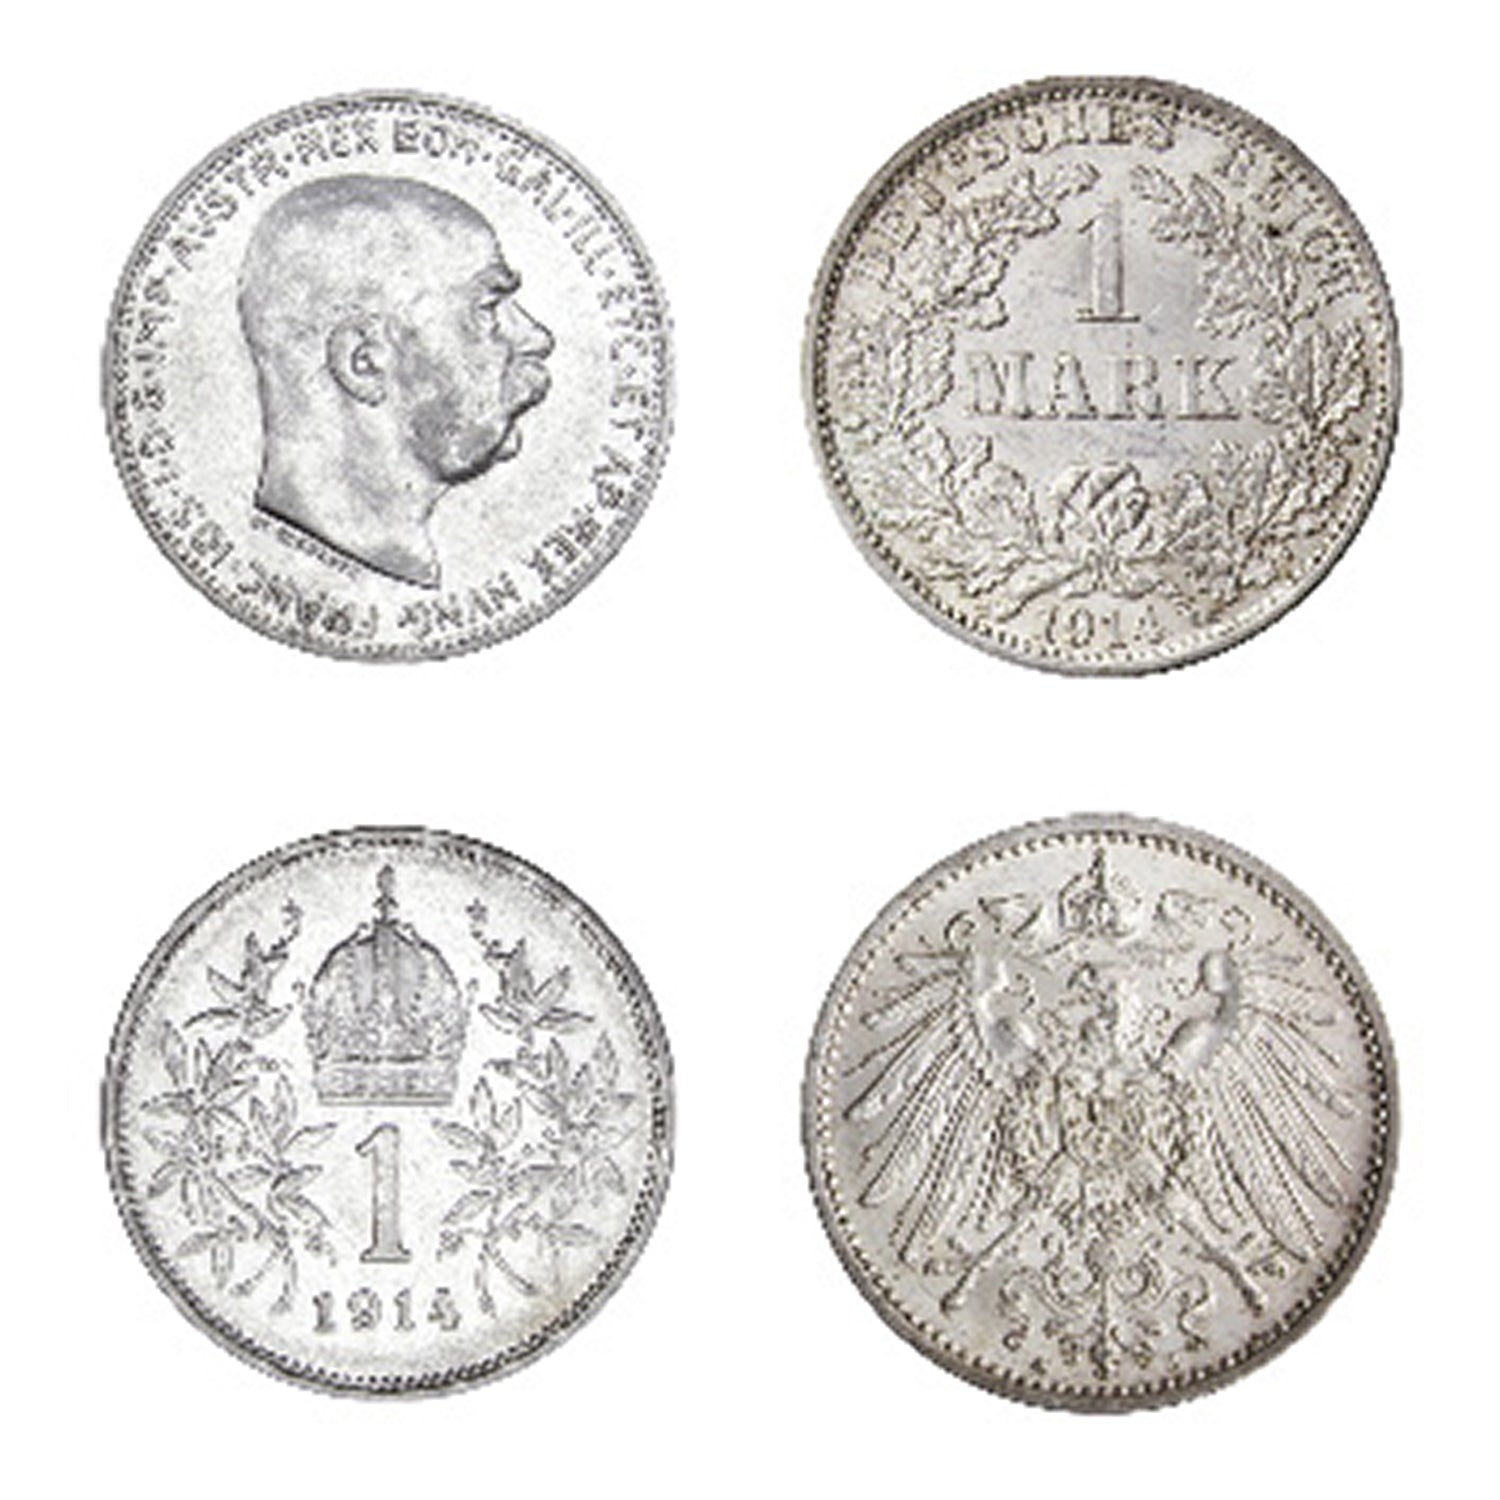 2 Silver Coins from the Time of the Great War